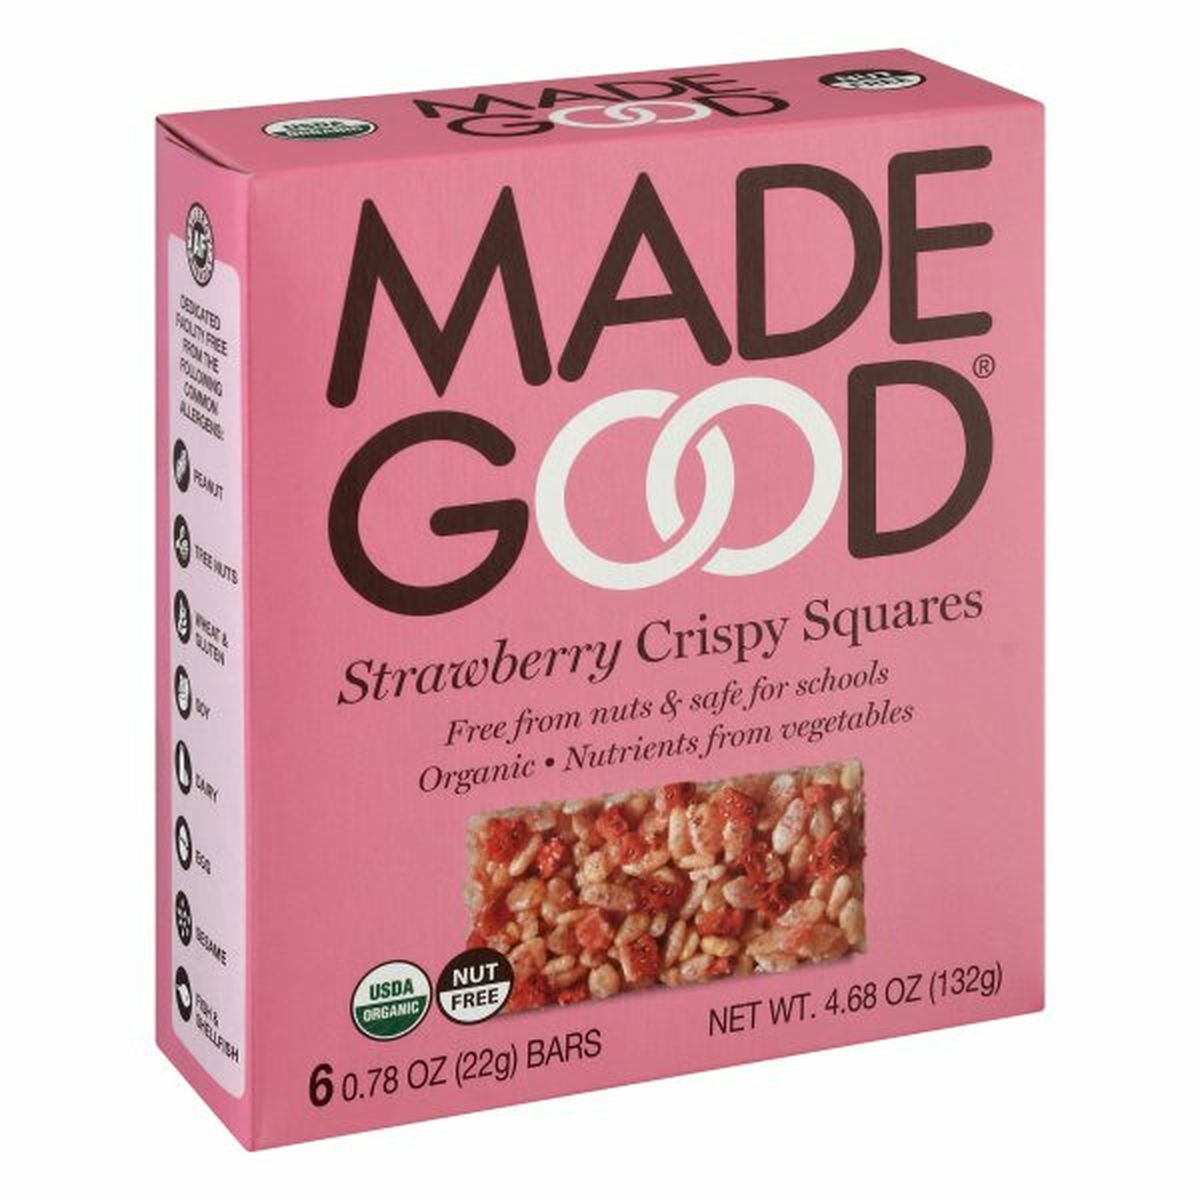 Calories in Made Good Crispy Squares, Strawberry